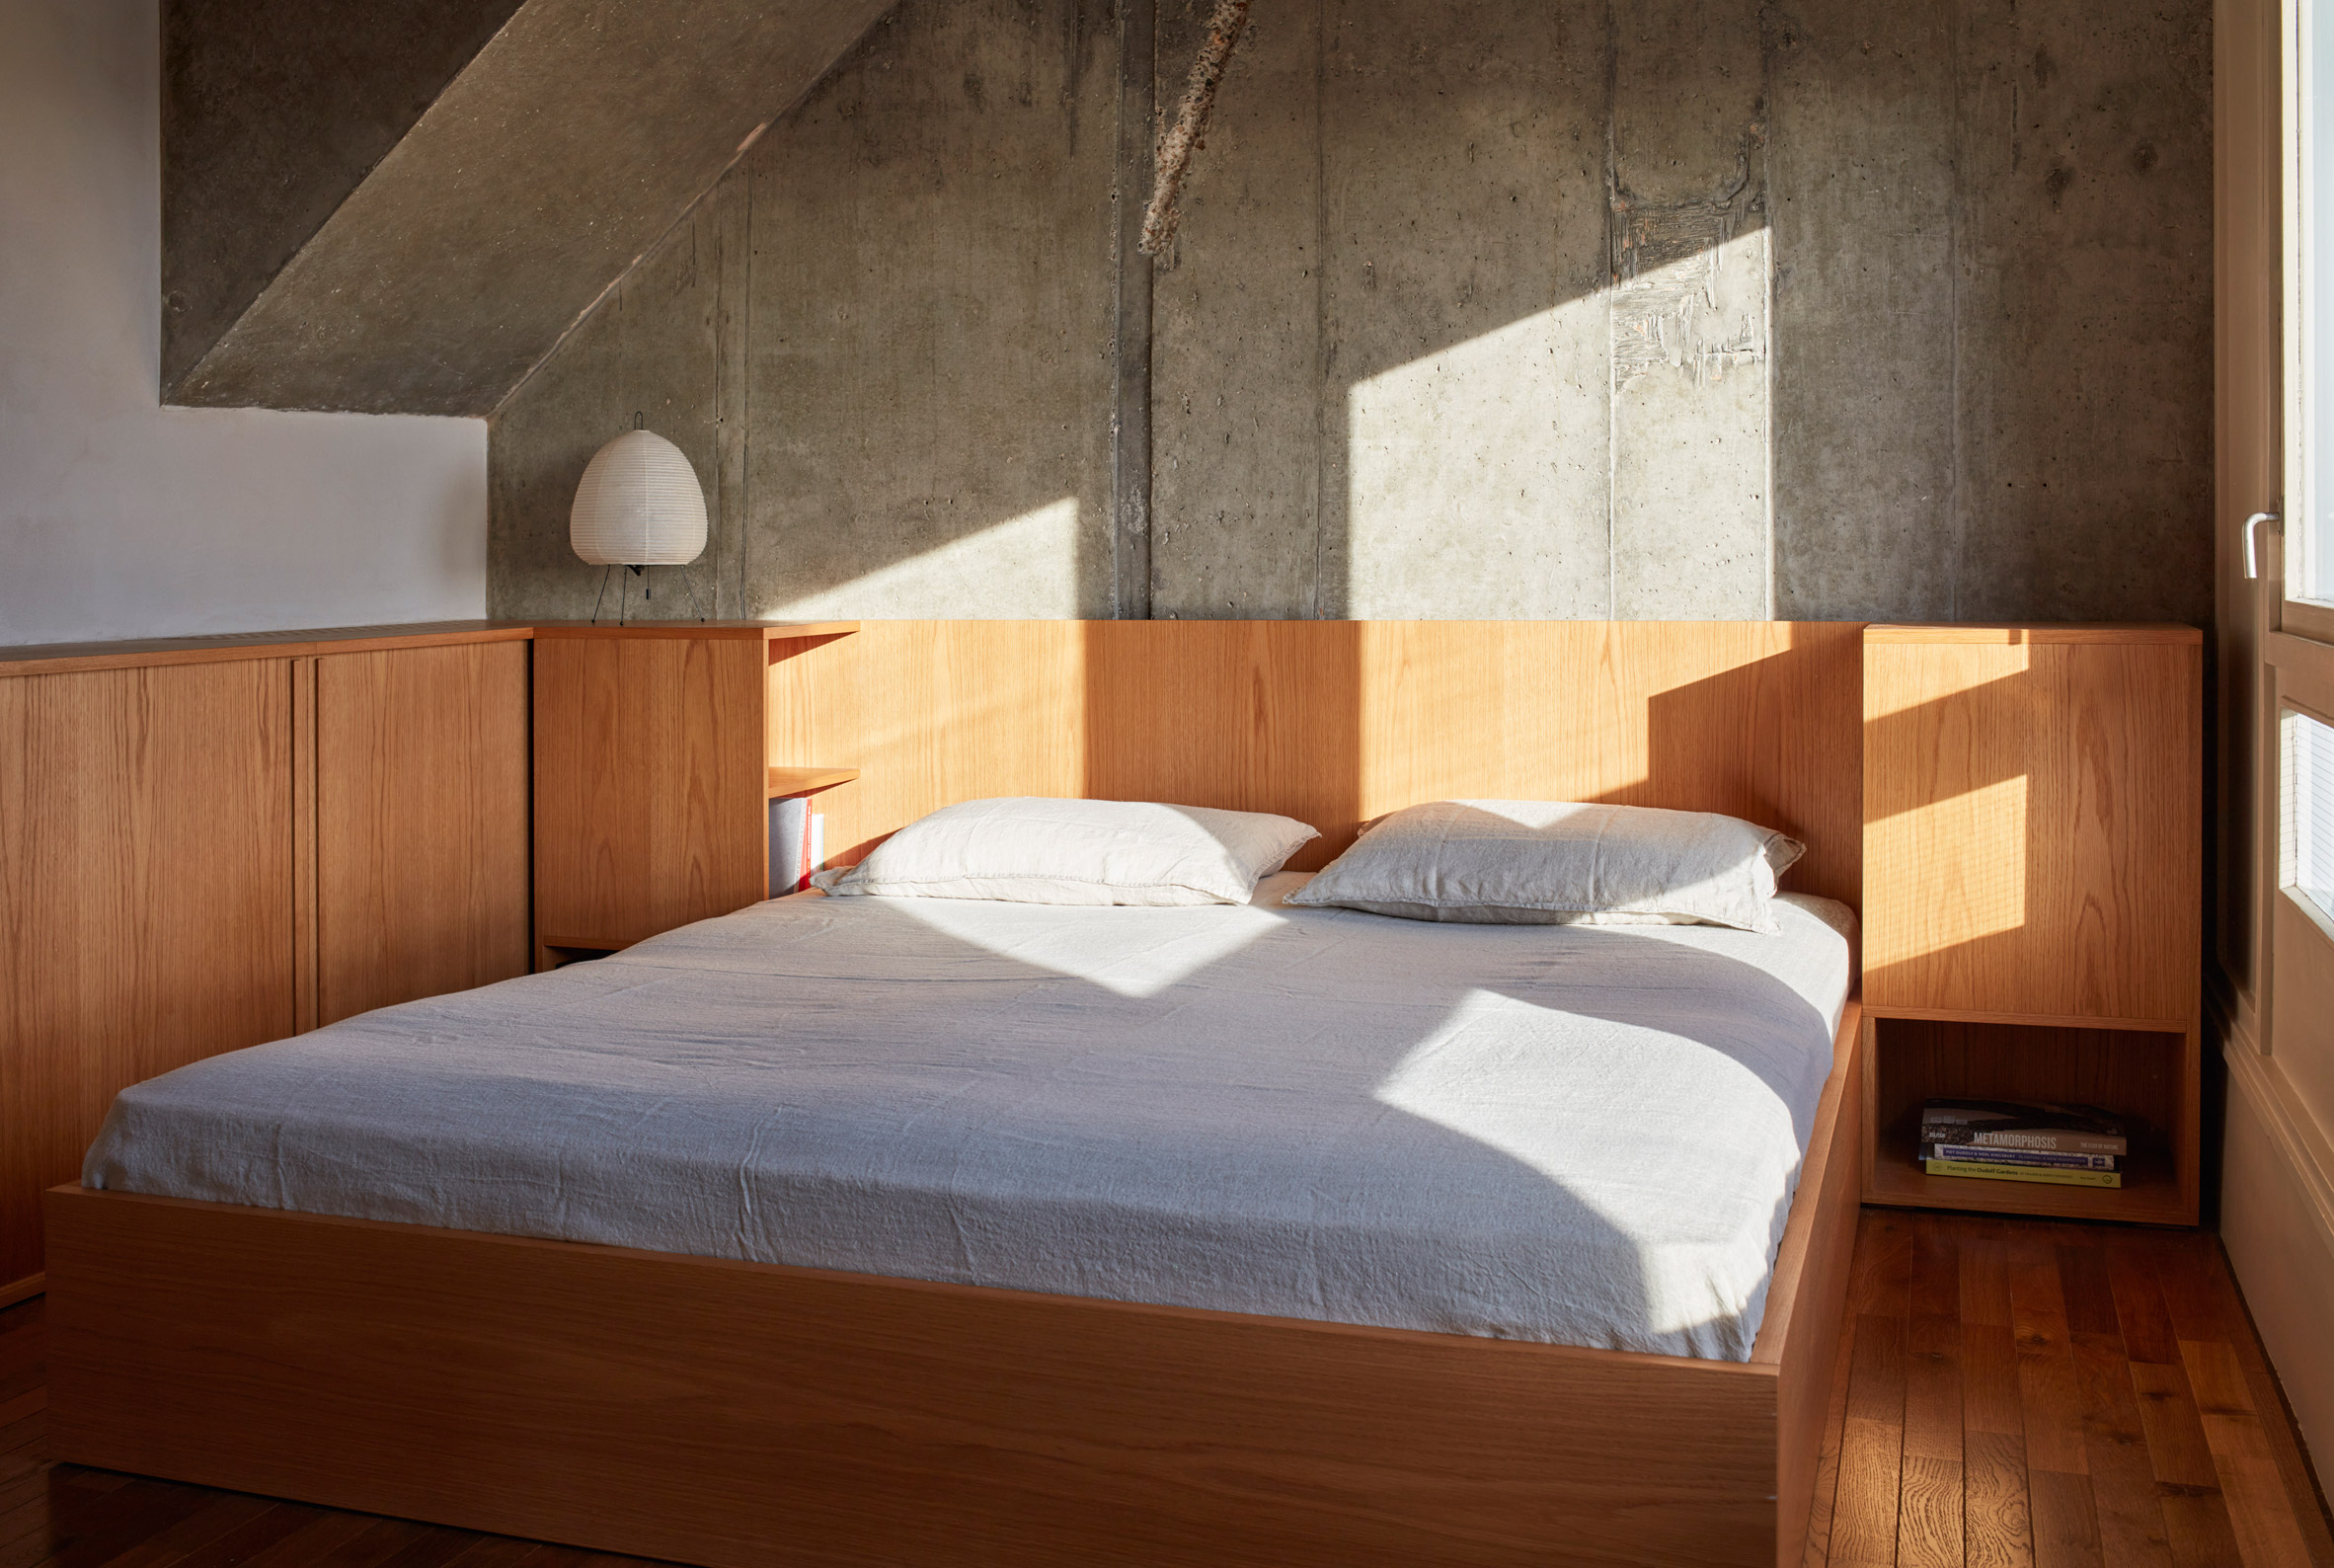 Trellick Tower flat in London features concrete and oak interior